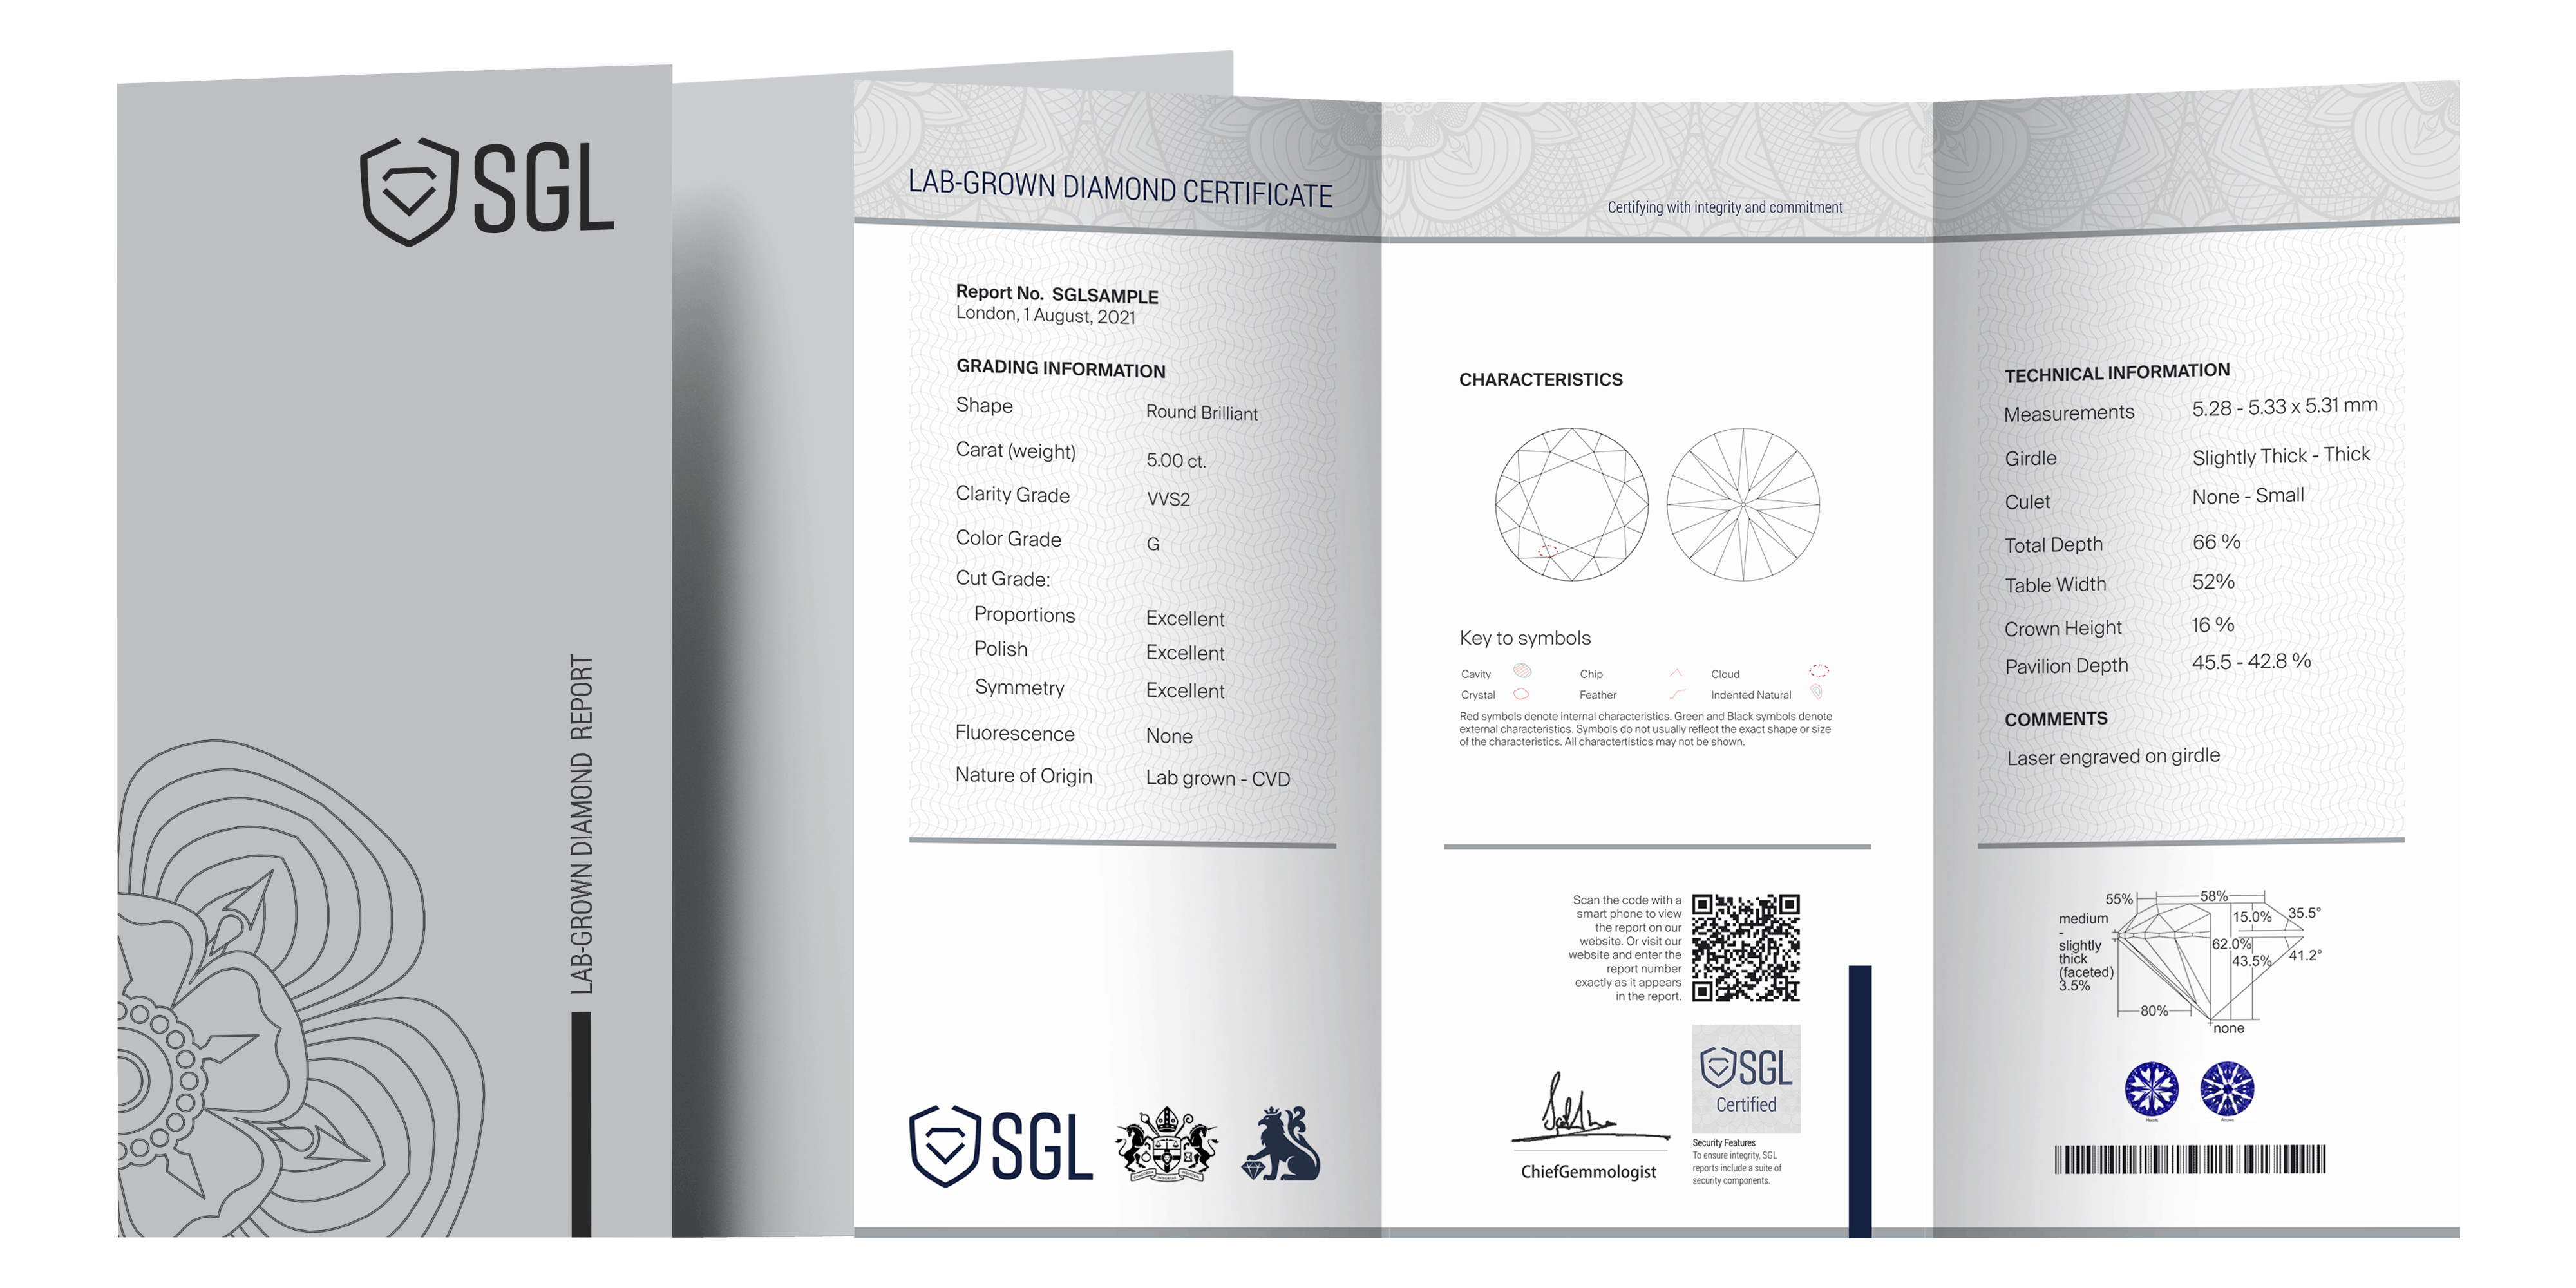 This is the third image of lab grown diamond certificate which mentions grading information characteristics and technical information about the diamond.